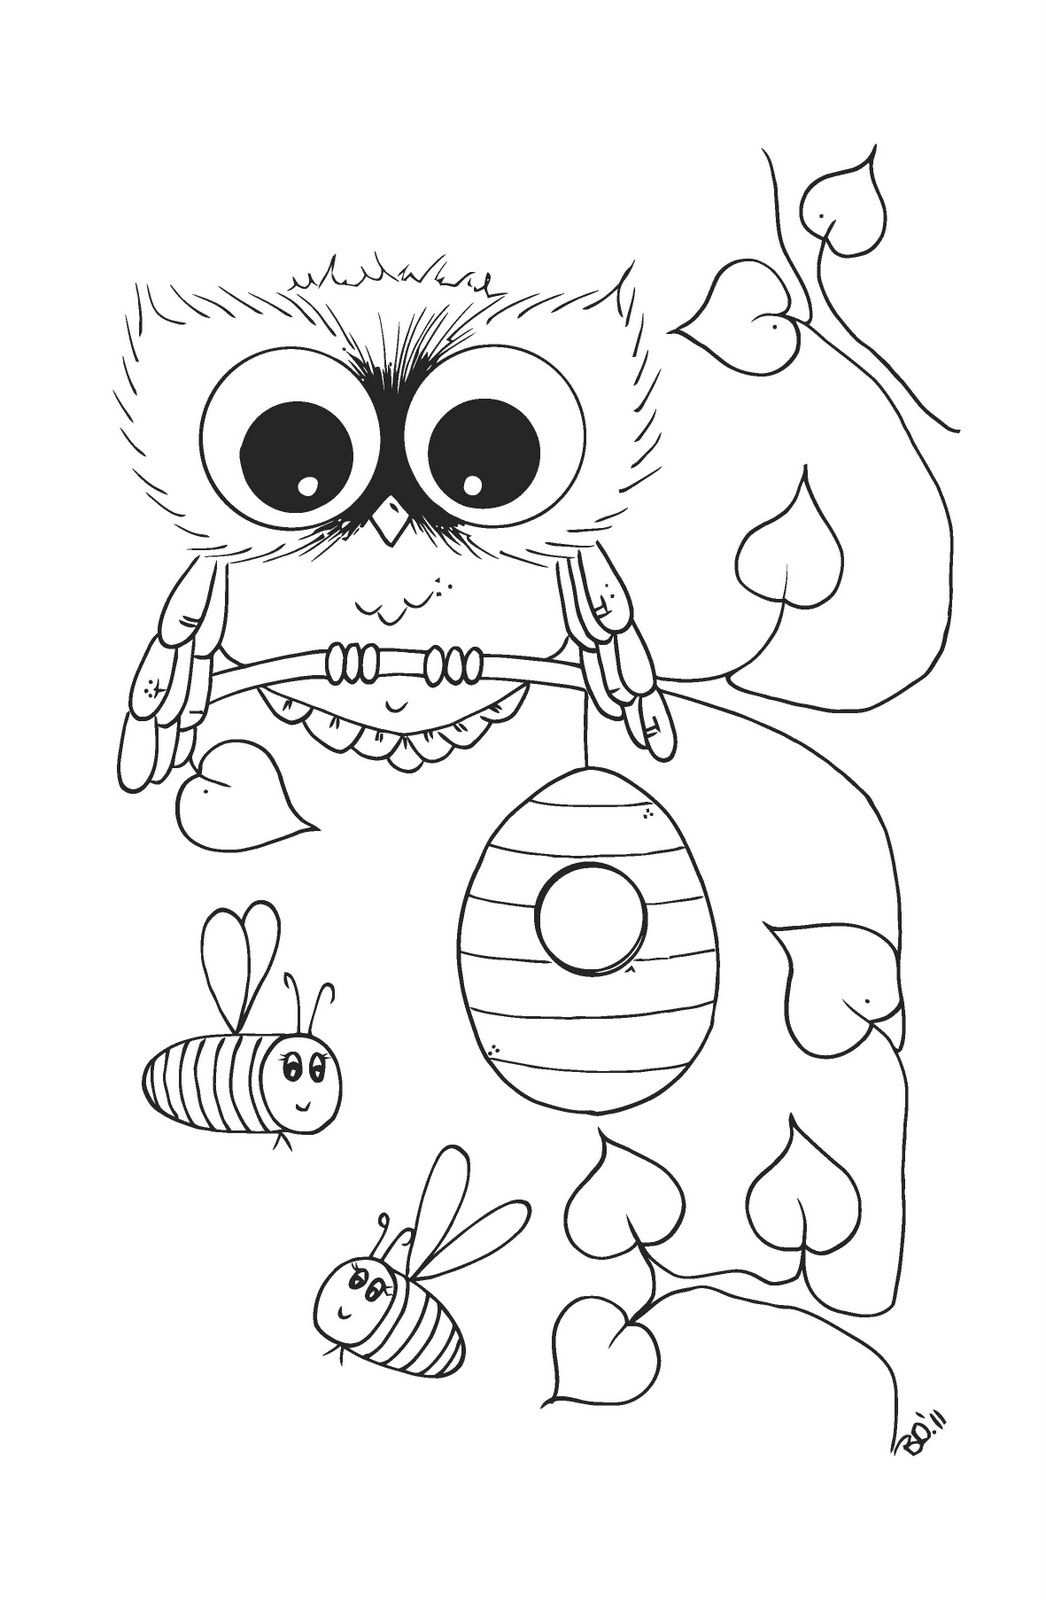 New Coloring Page With Images Owl Coloring Pages Coloring Pages